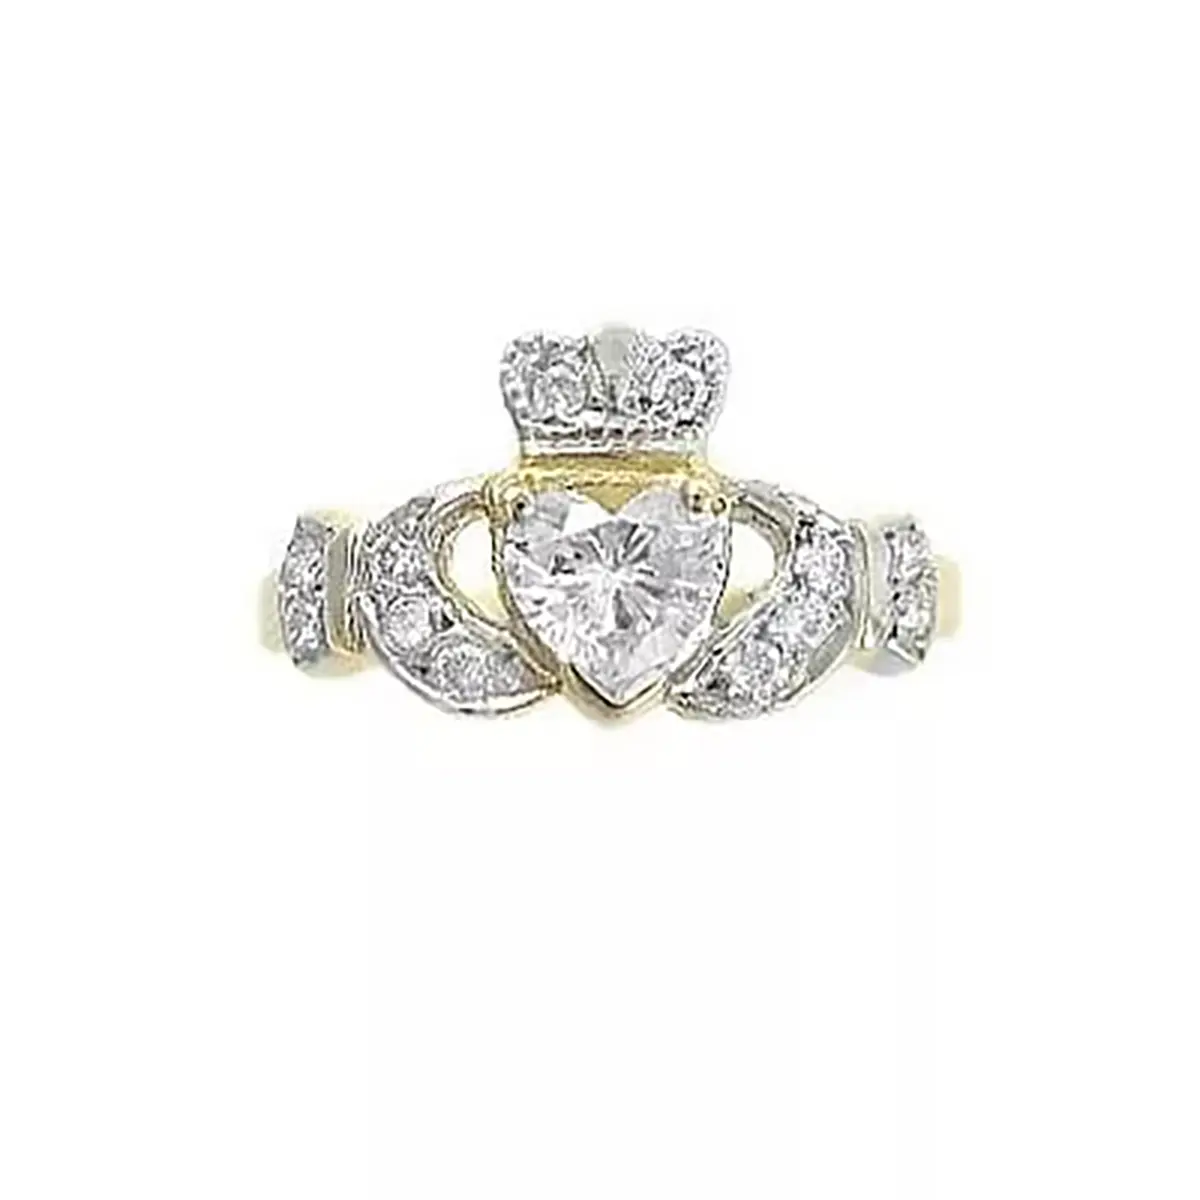 Claddagh Engagement Ring In Gold With Diamonds...